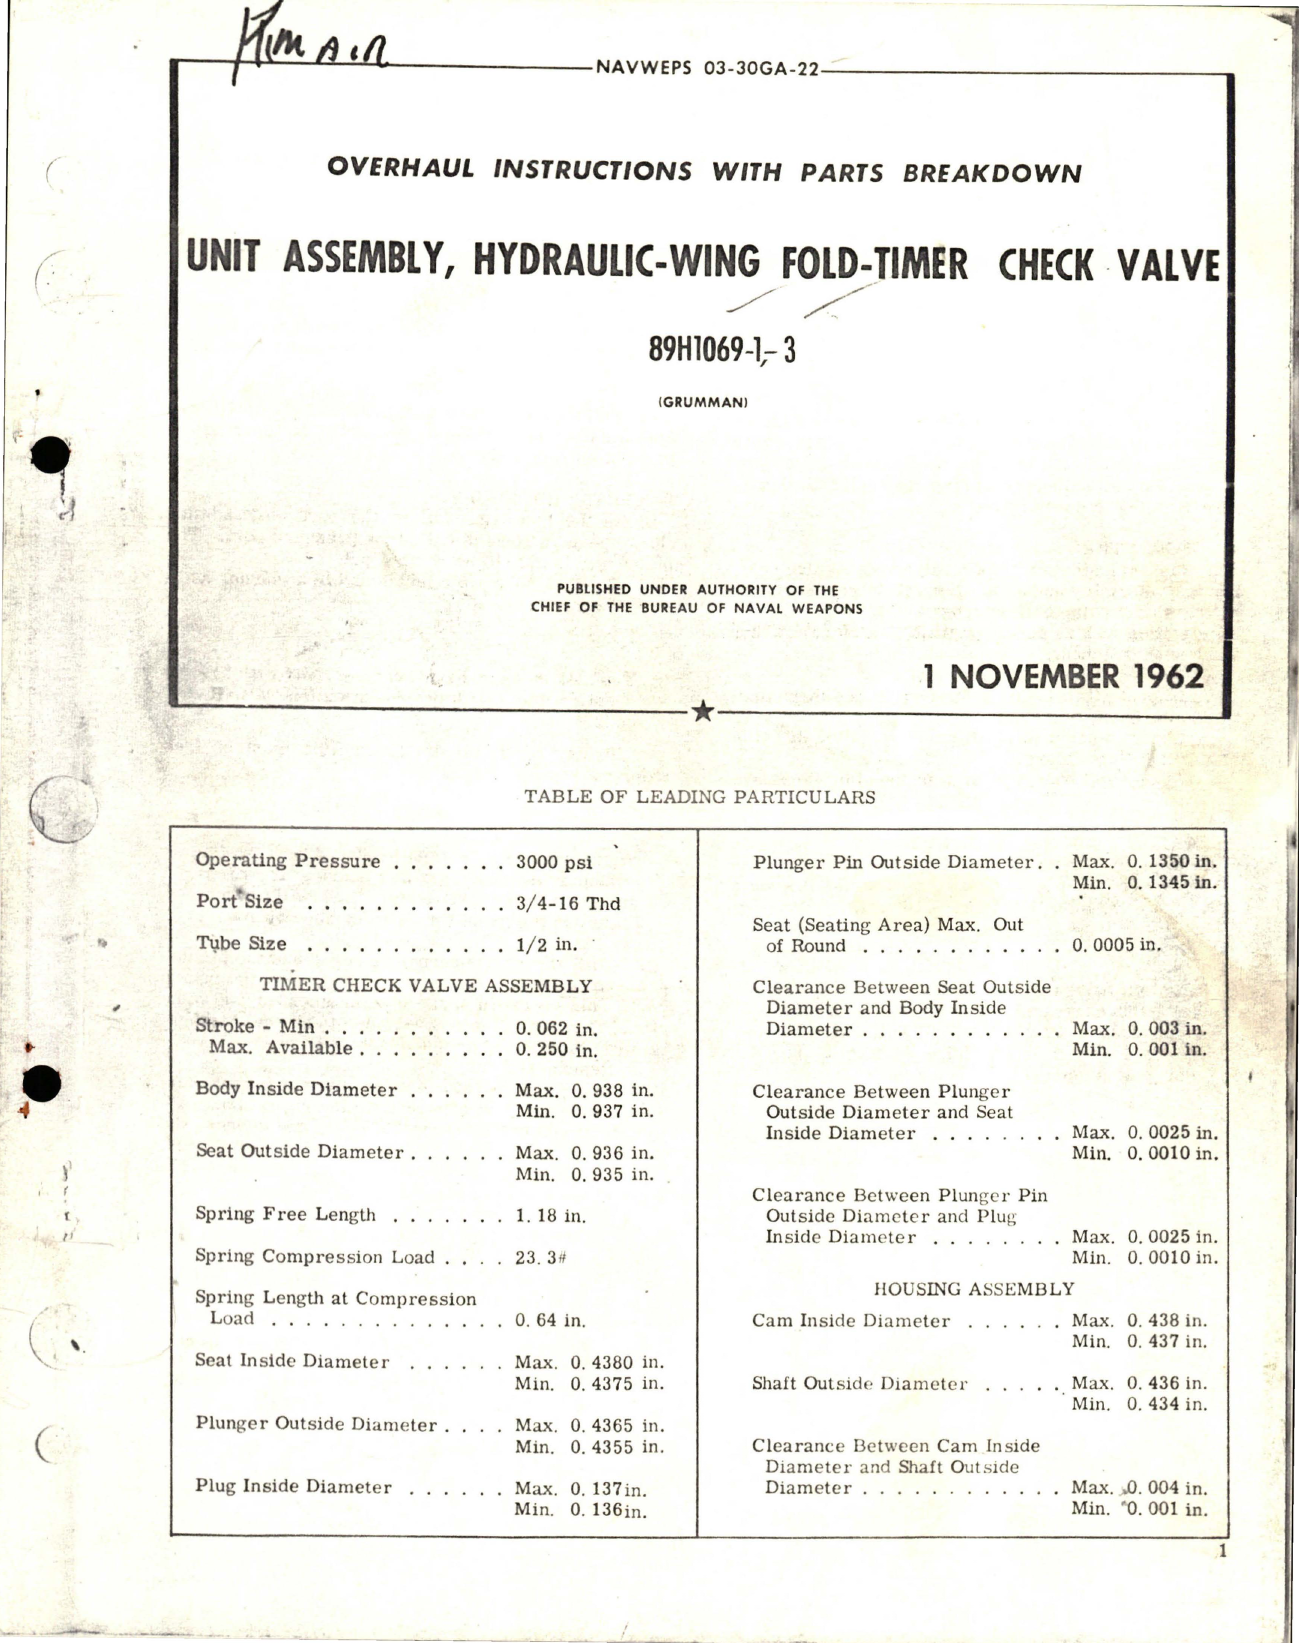 Sample page 1 from AirCorps Library document: Overhaul Instructions with Parts for Hydraulic Wing Fold Timer Check Valve Unit Assembly - 89H1069-1 and 89H1069-3